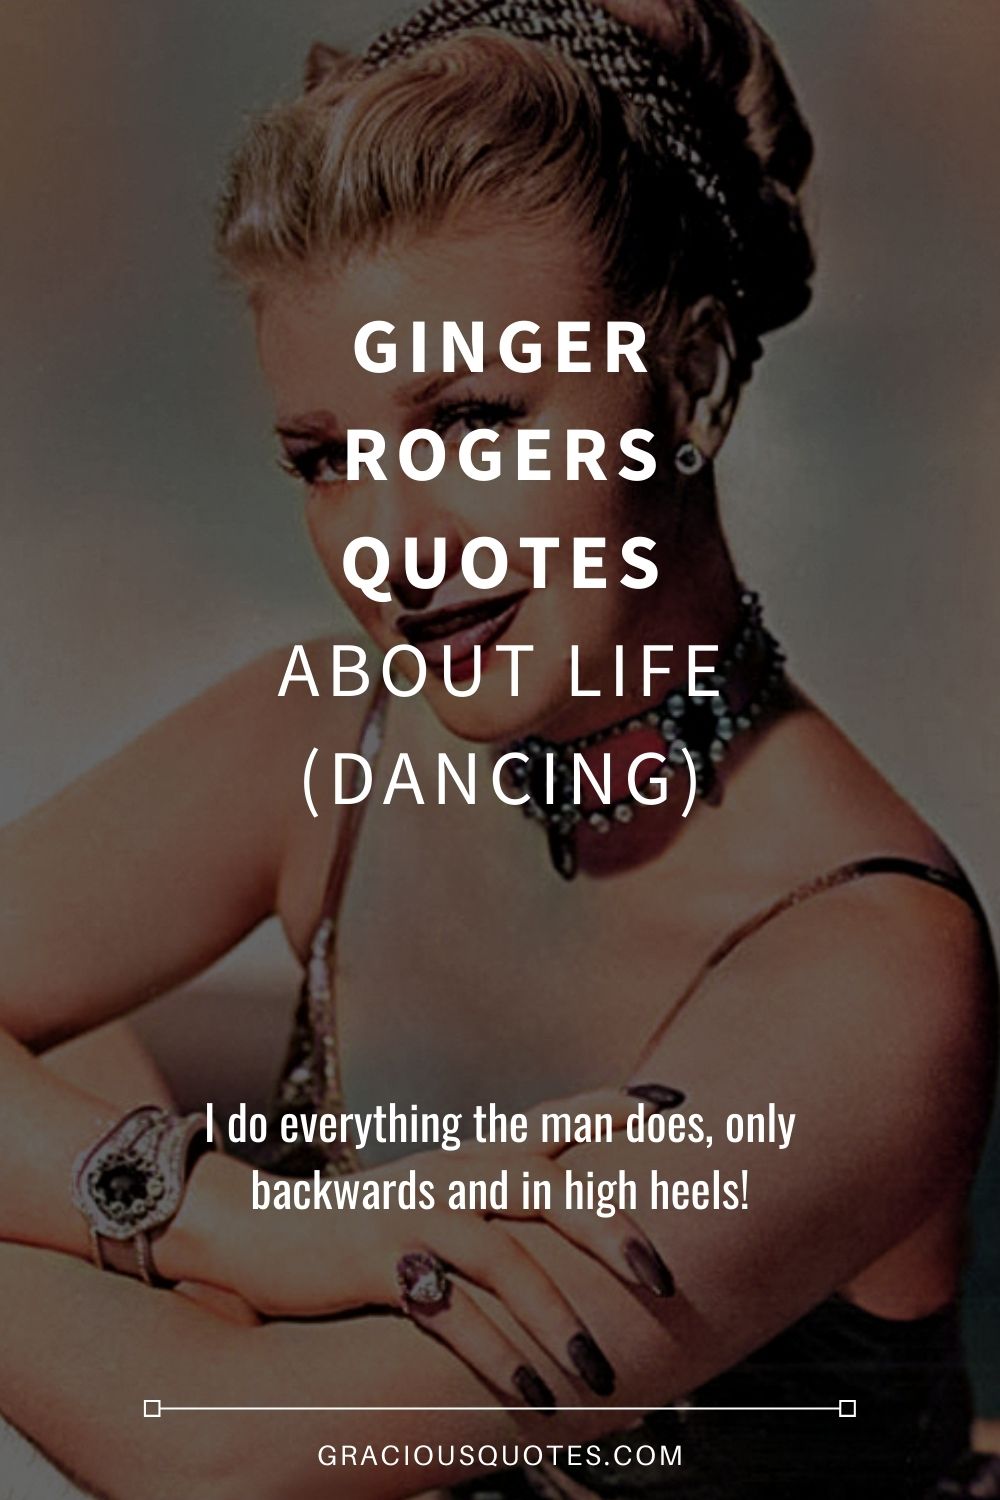 Ginger Rogers Quotes About Life (DANCING) - Gracious Quotes